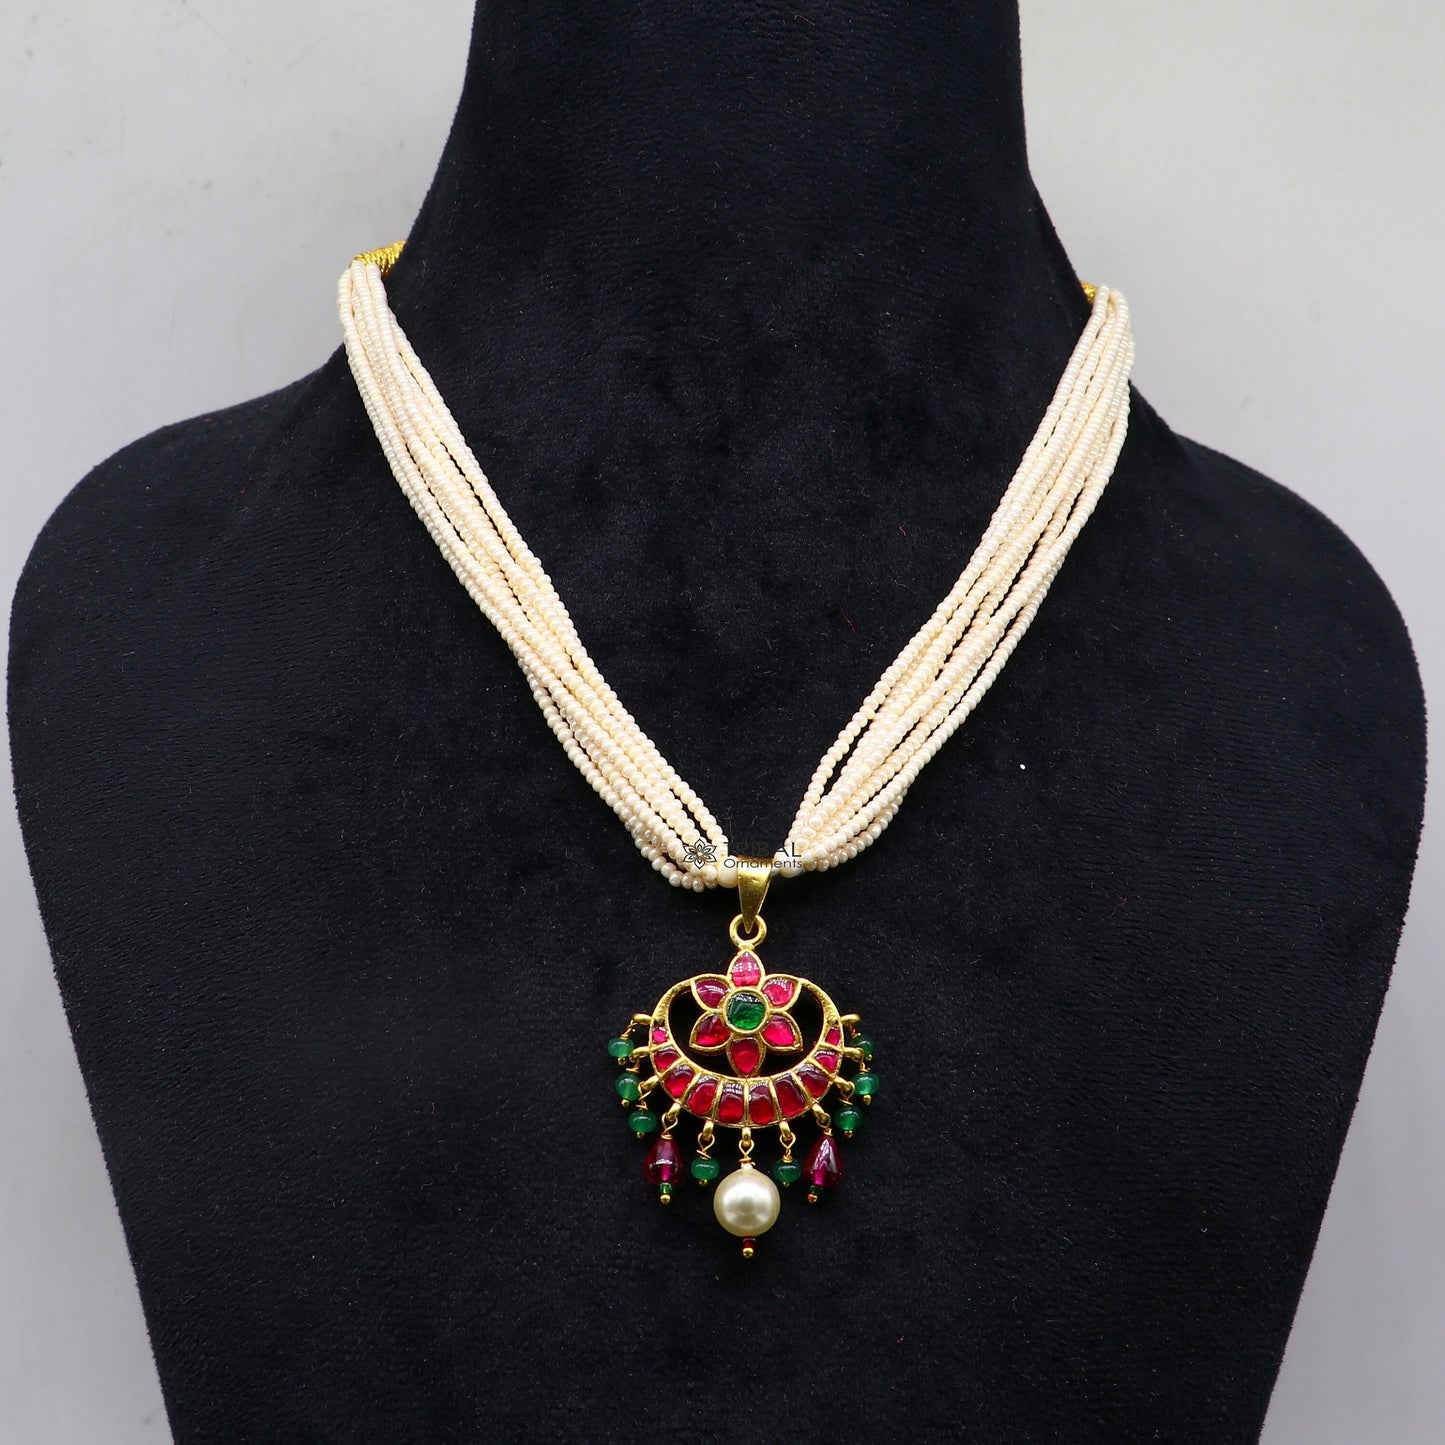 92.5 sterling silver Fabulous charming kundan work green and red stone pendant trendy necklace with multiline pearls strings jewelry set616 - TRIBAL ORNAMENTS